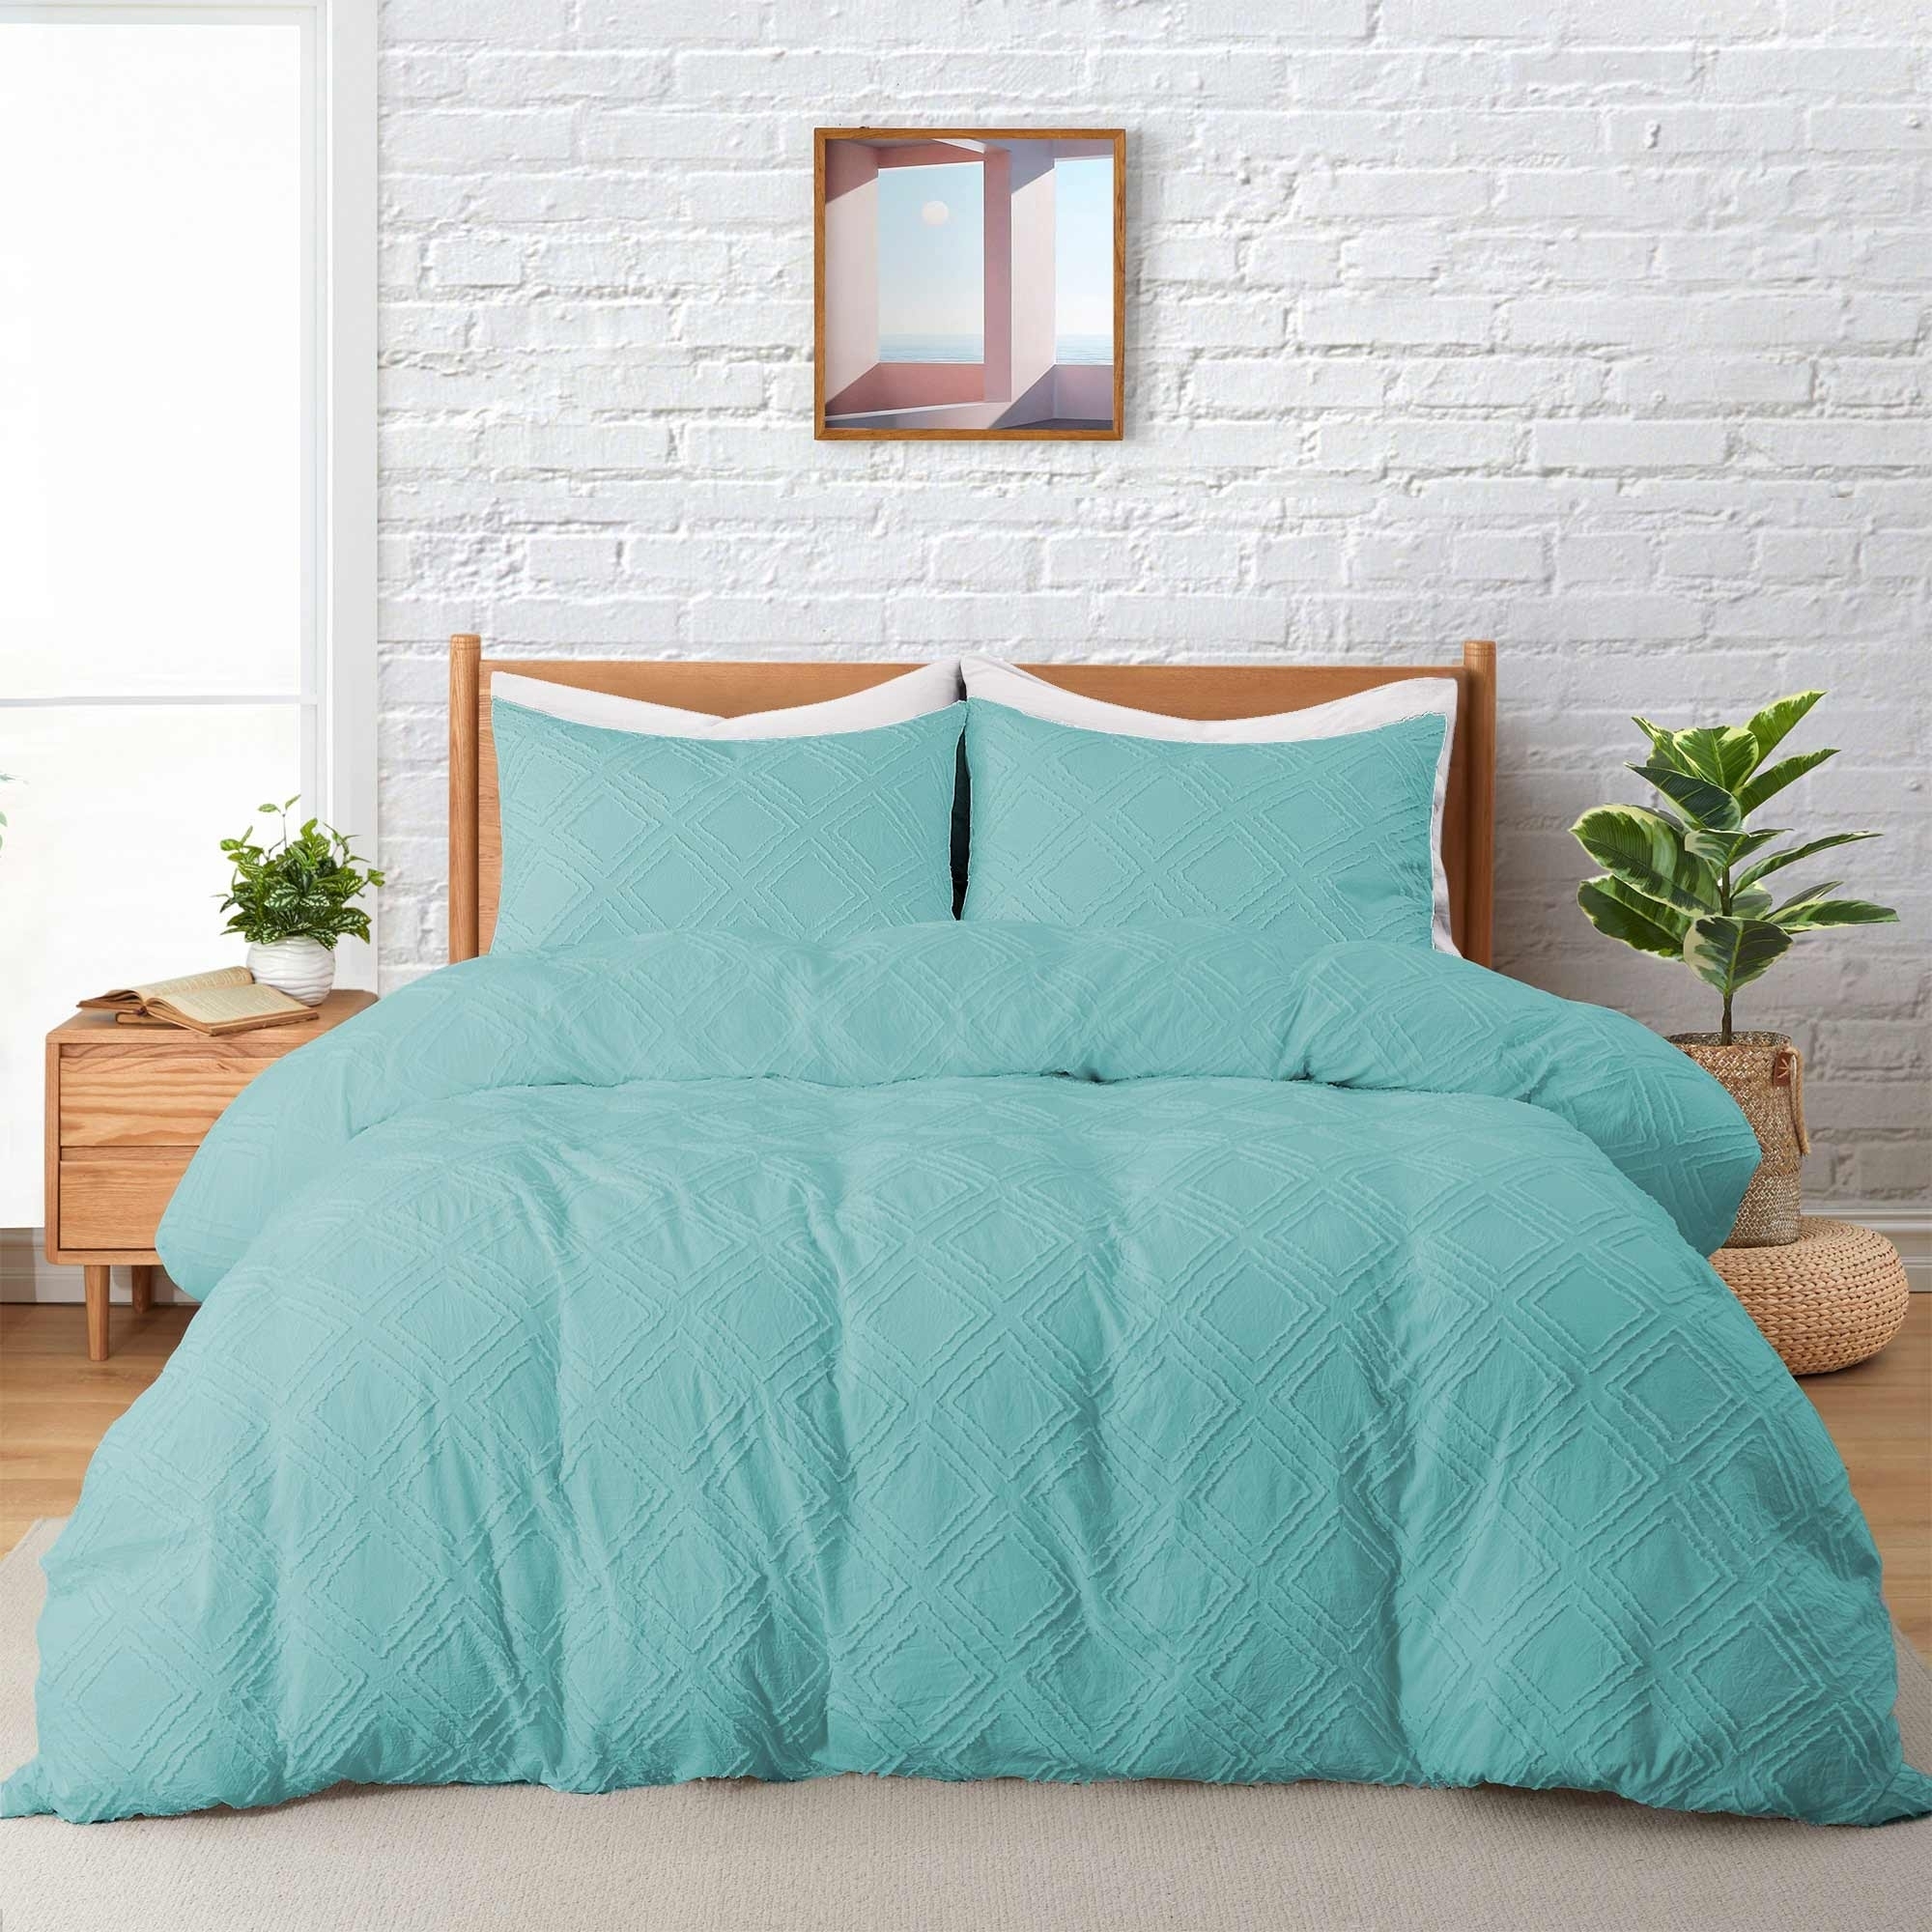 Clipped Jacquard Duvet Cover Set With Shams - Teal/Square, Full/Queen